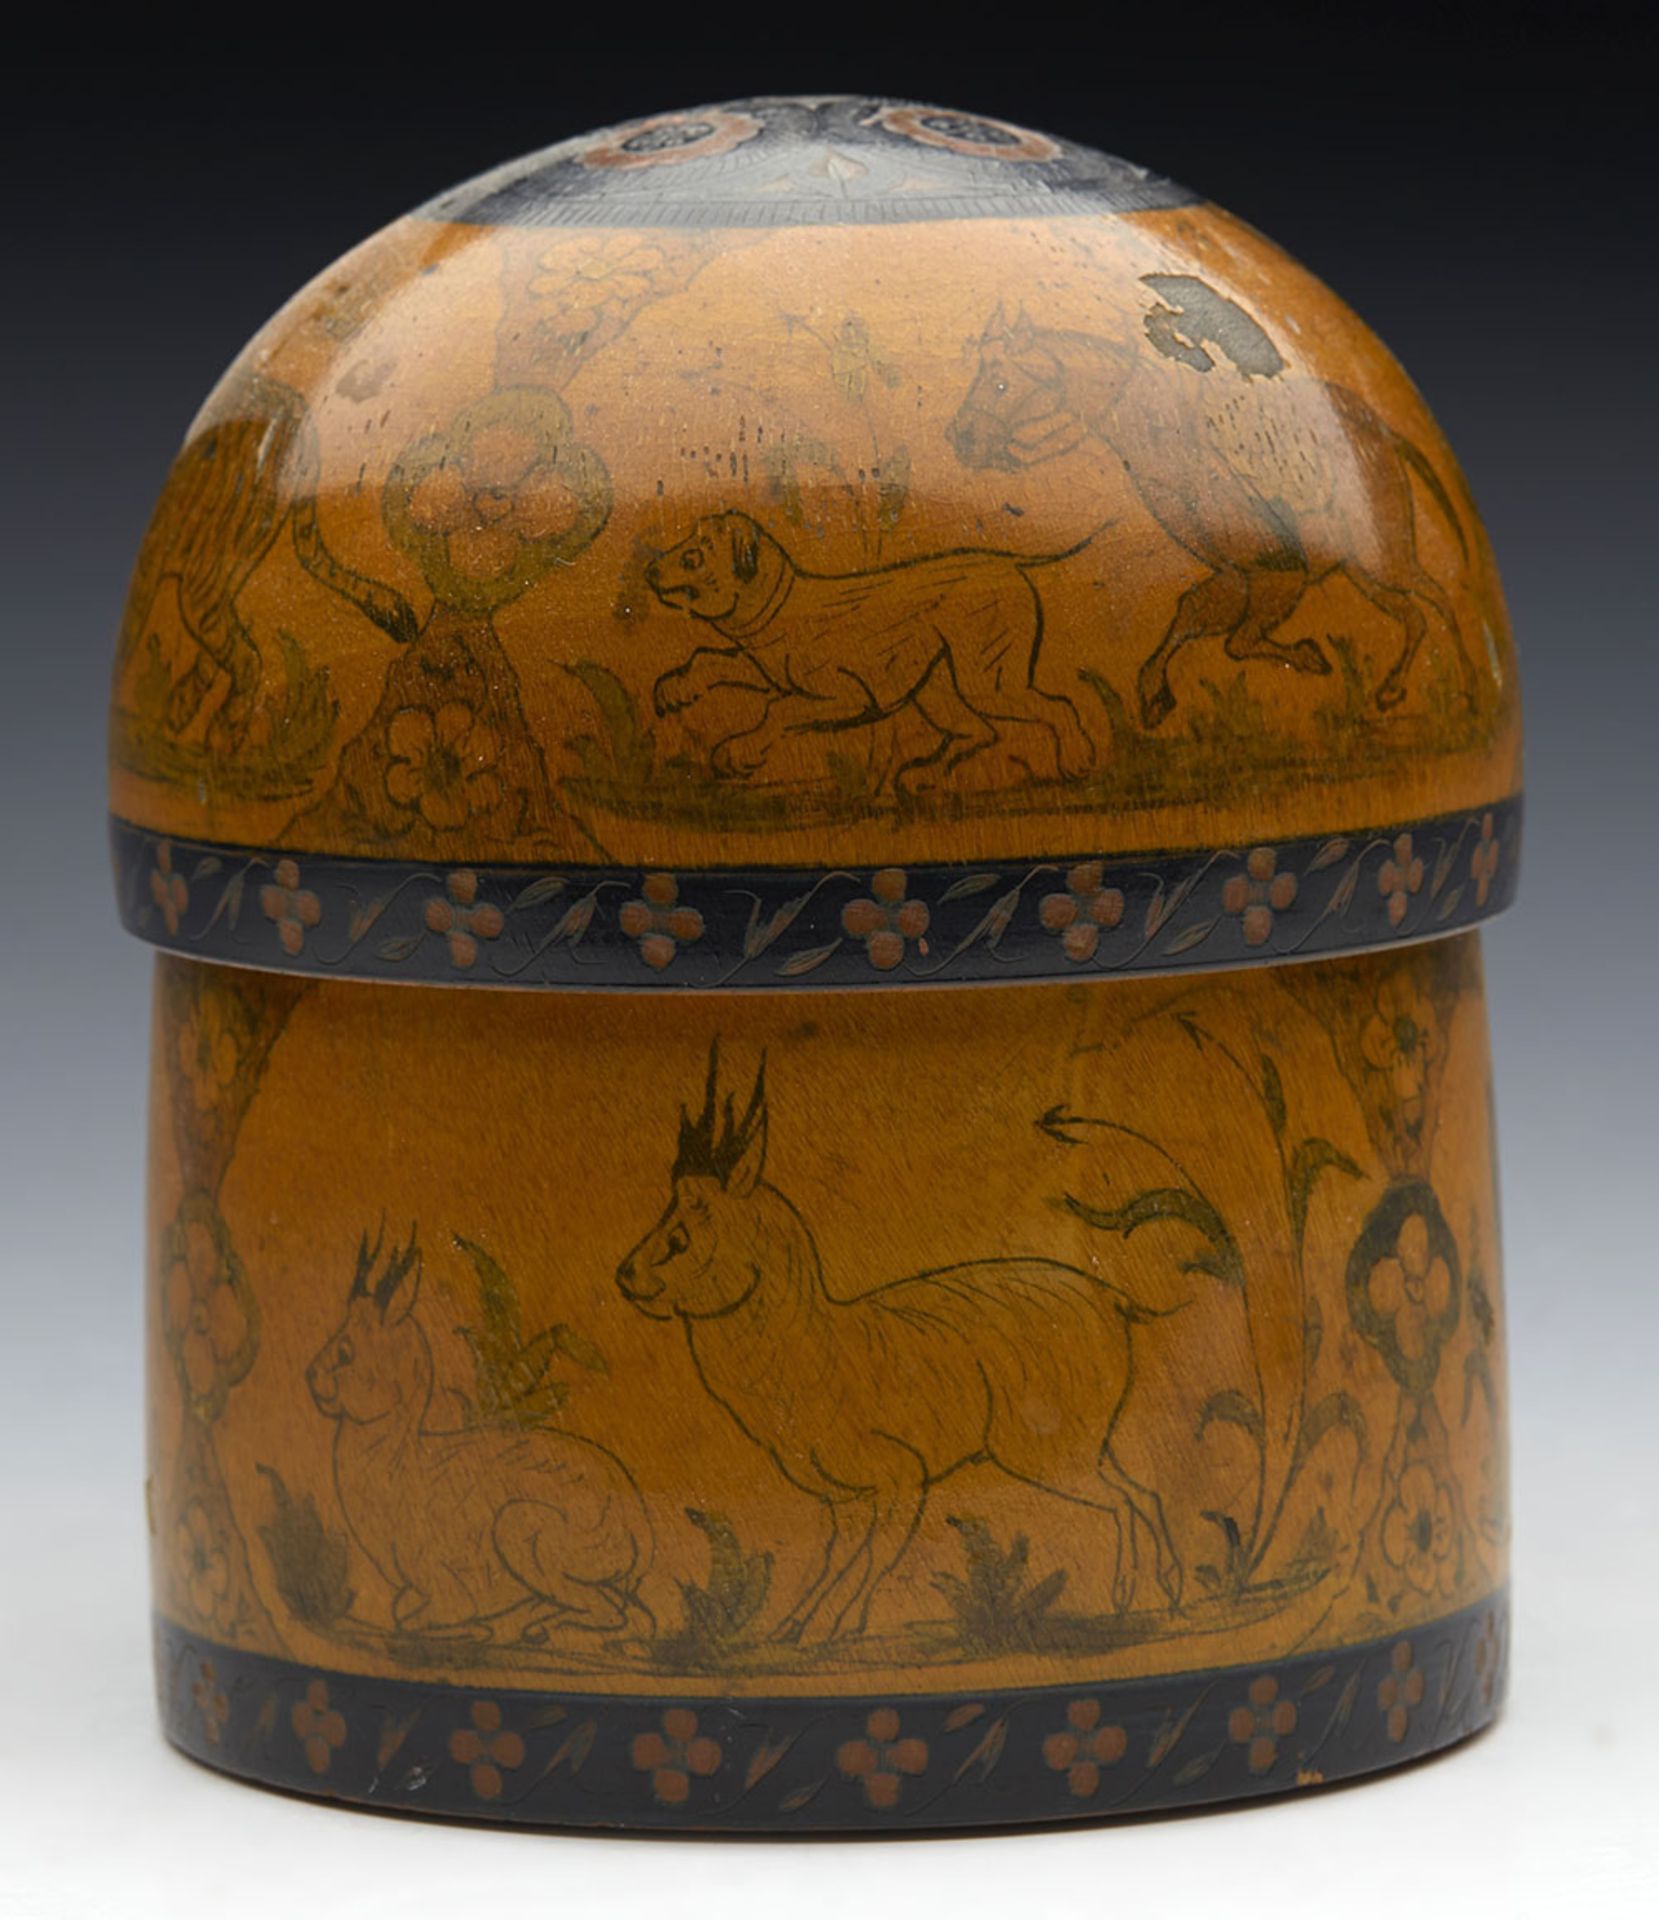 Antique Indian Wooden Lidded Jar Painted With Animals & Figures 19Th C. - Image 10 of 10